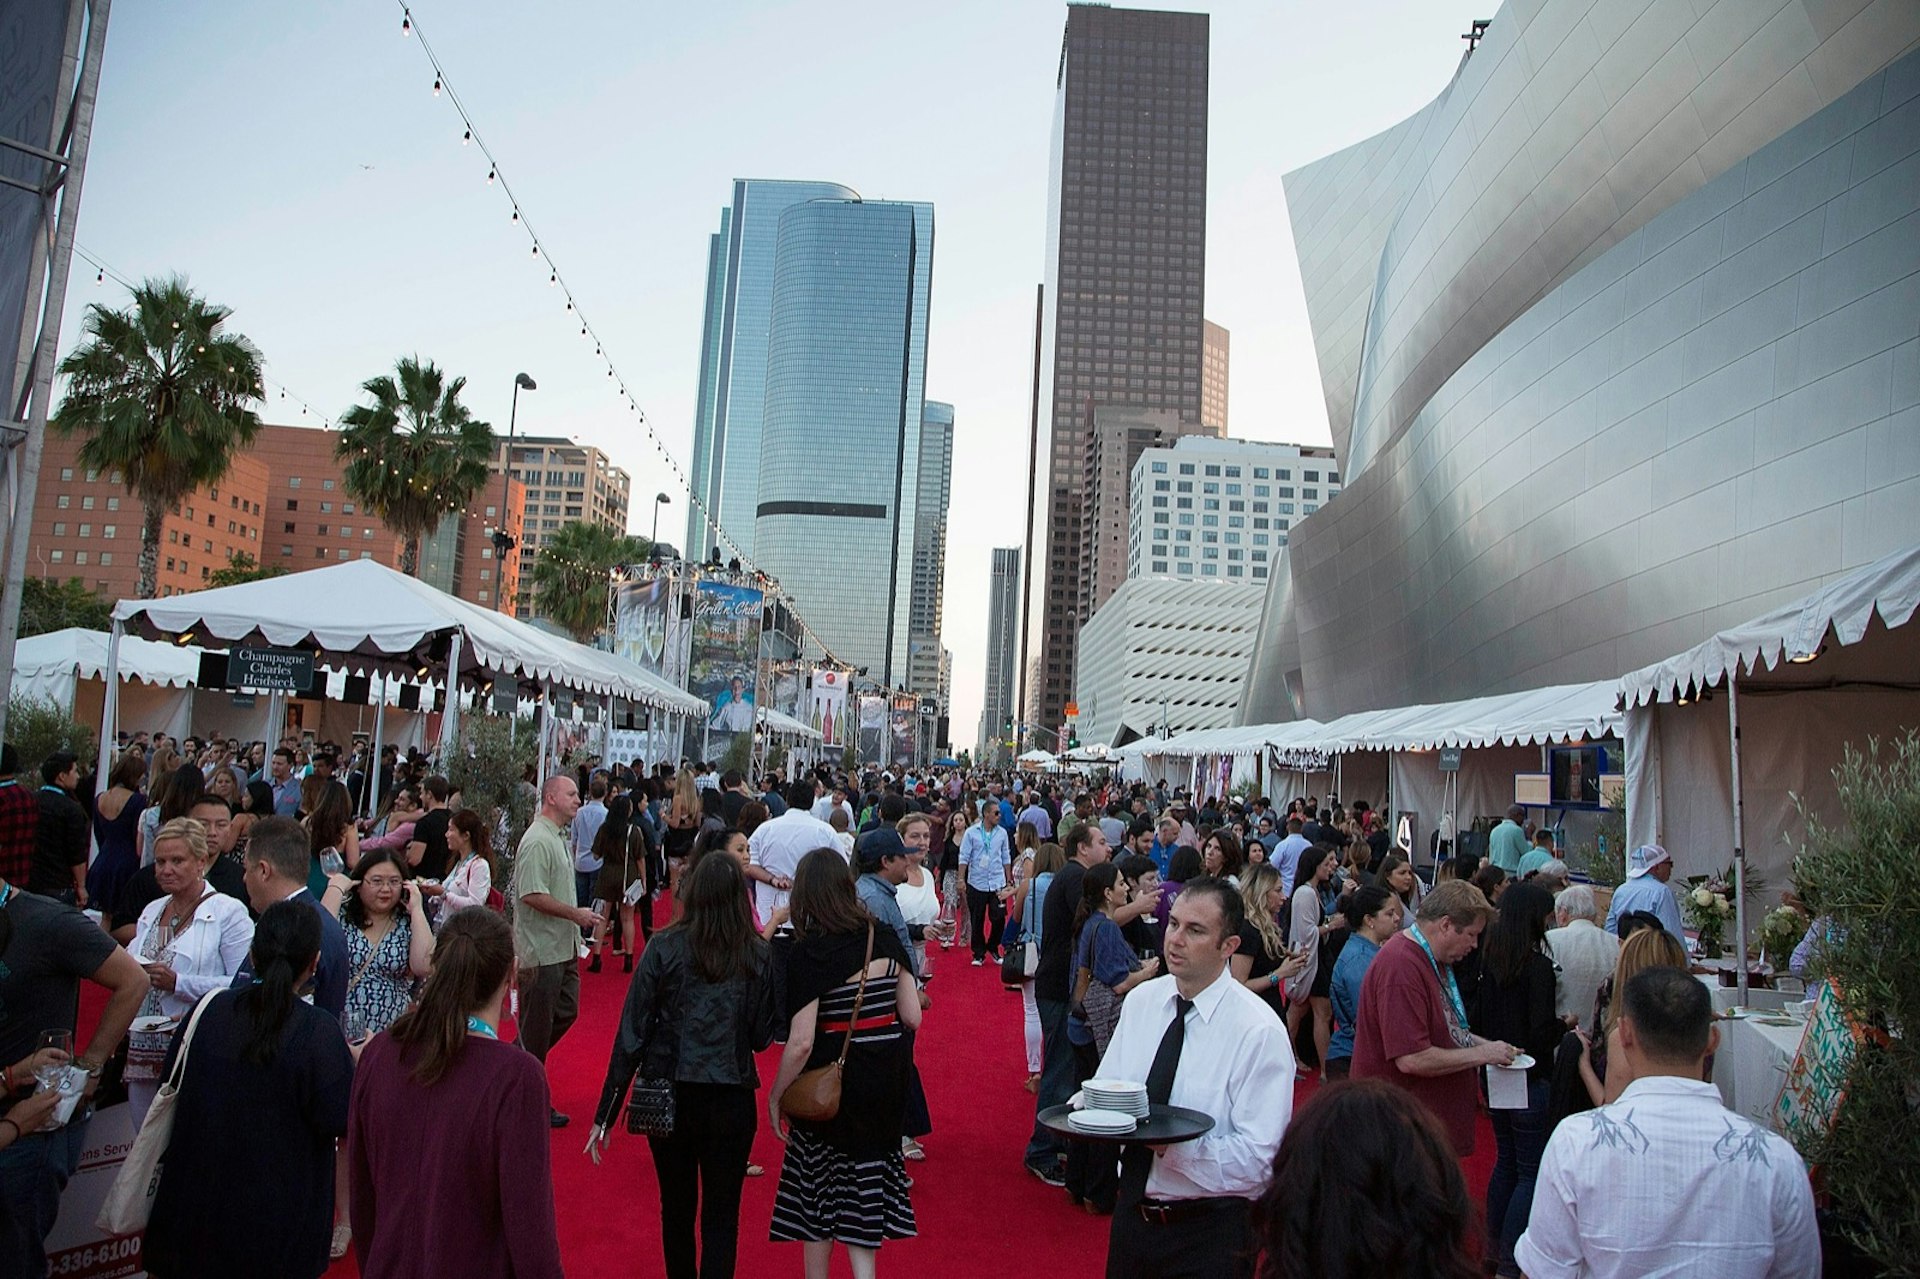 Well dressed people mingle on a red carpet with sky scrapers in the background while a man in a tie holds a tray at one of California's best summer food and drink festivals